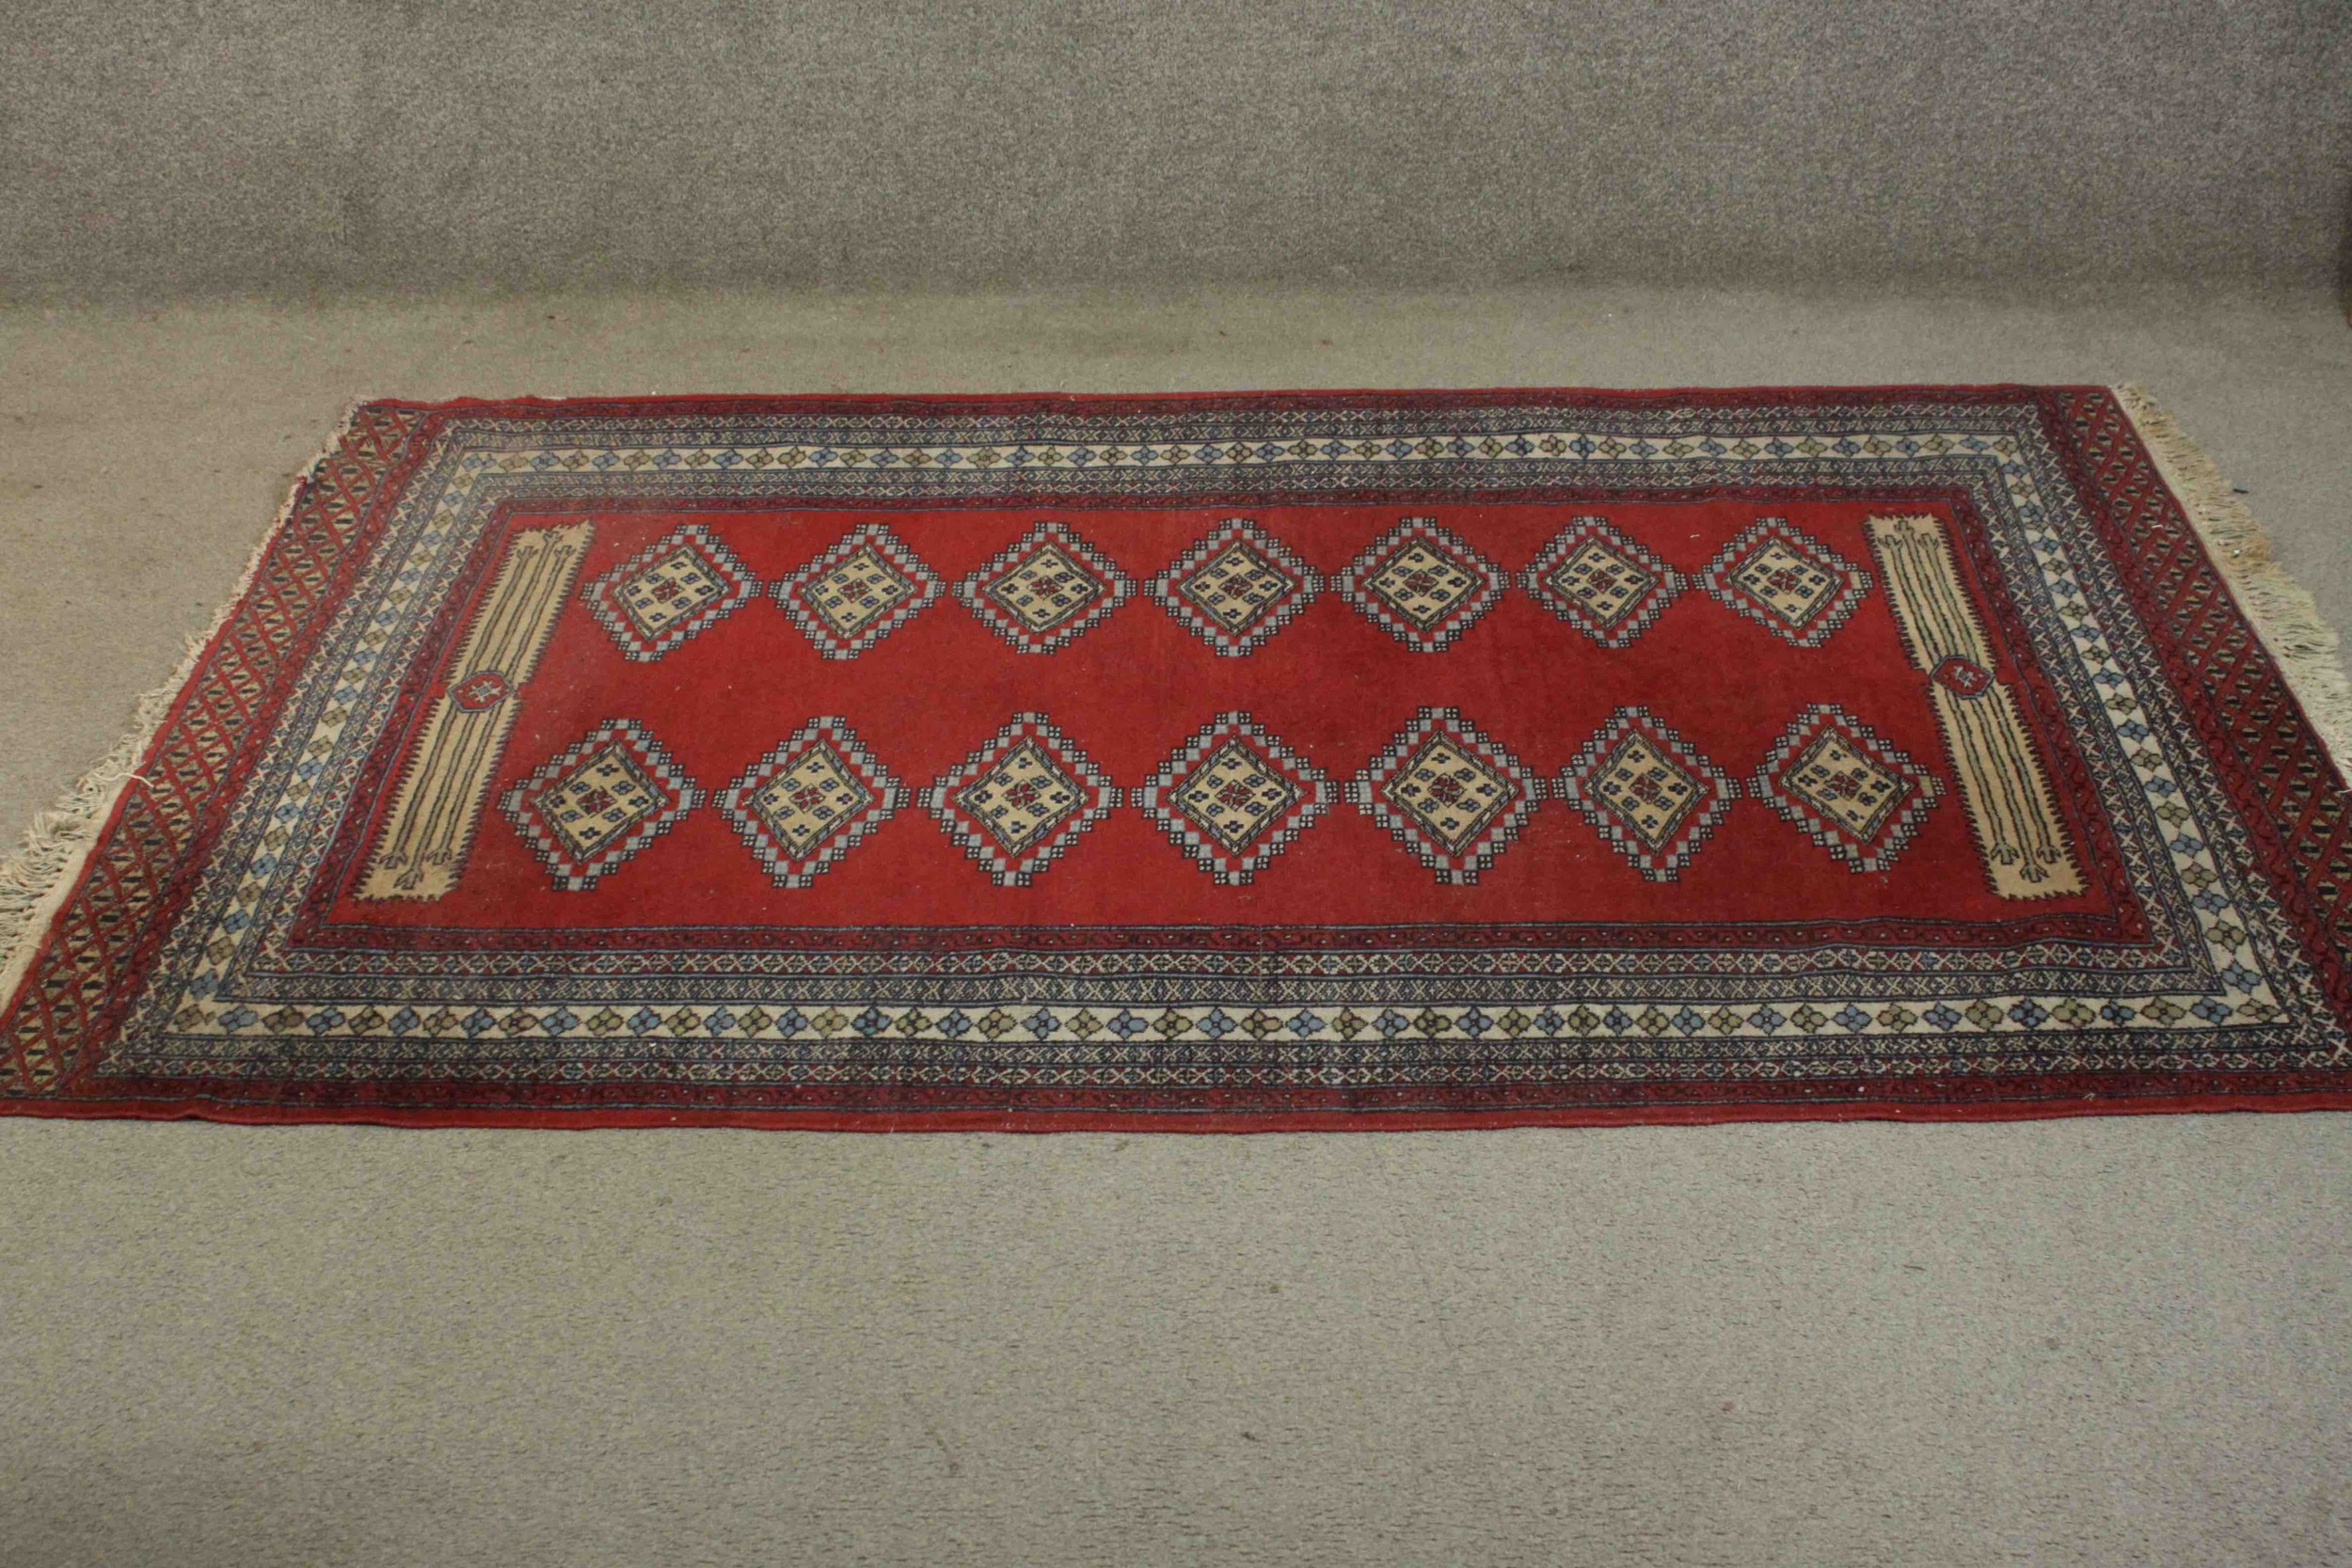 A Pakistan Bokhara with repeating diamond motifs on a burgundy field within stylised flowerhead